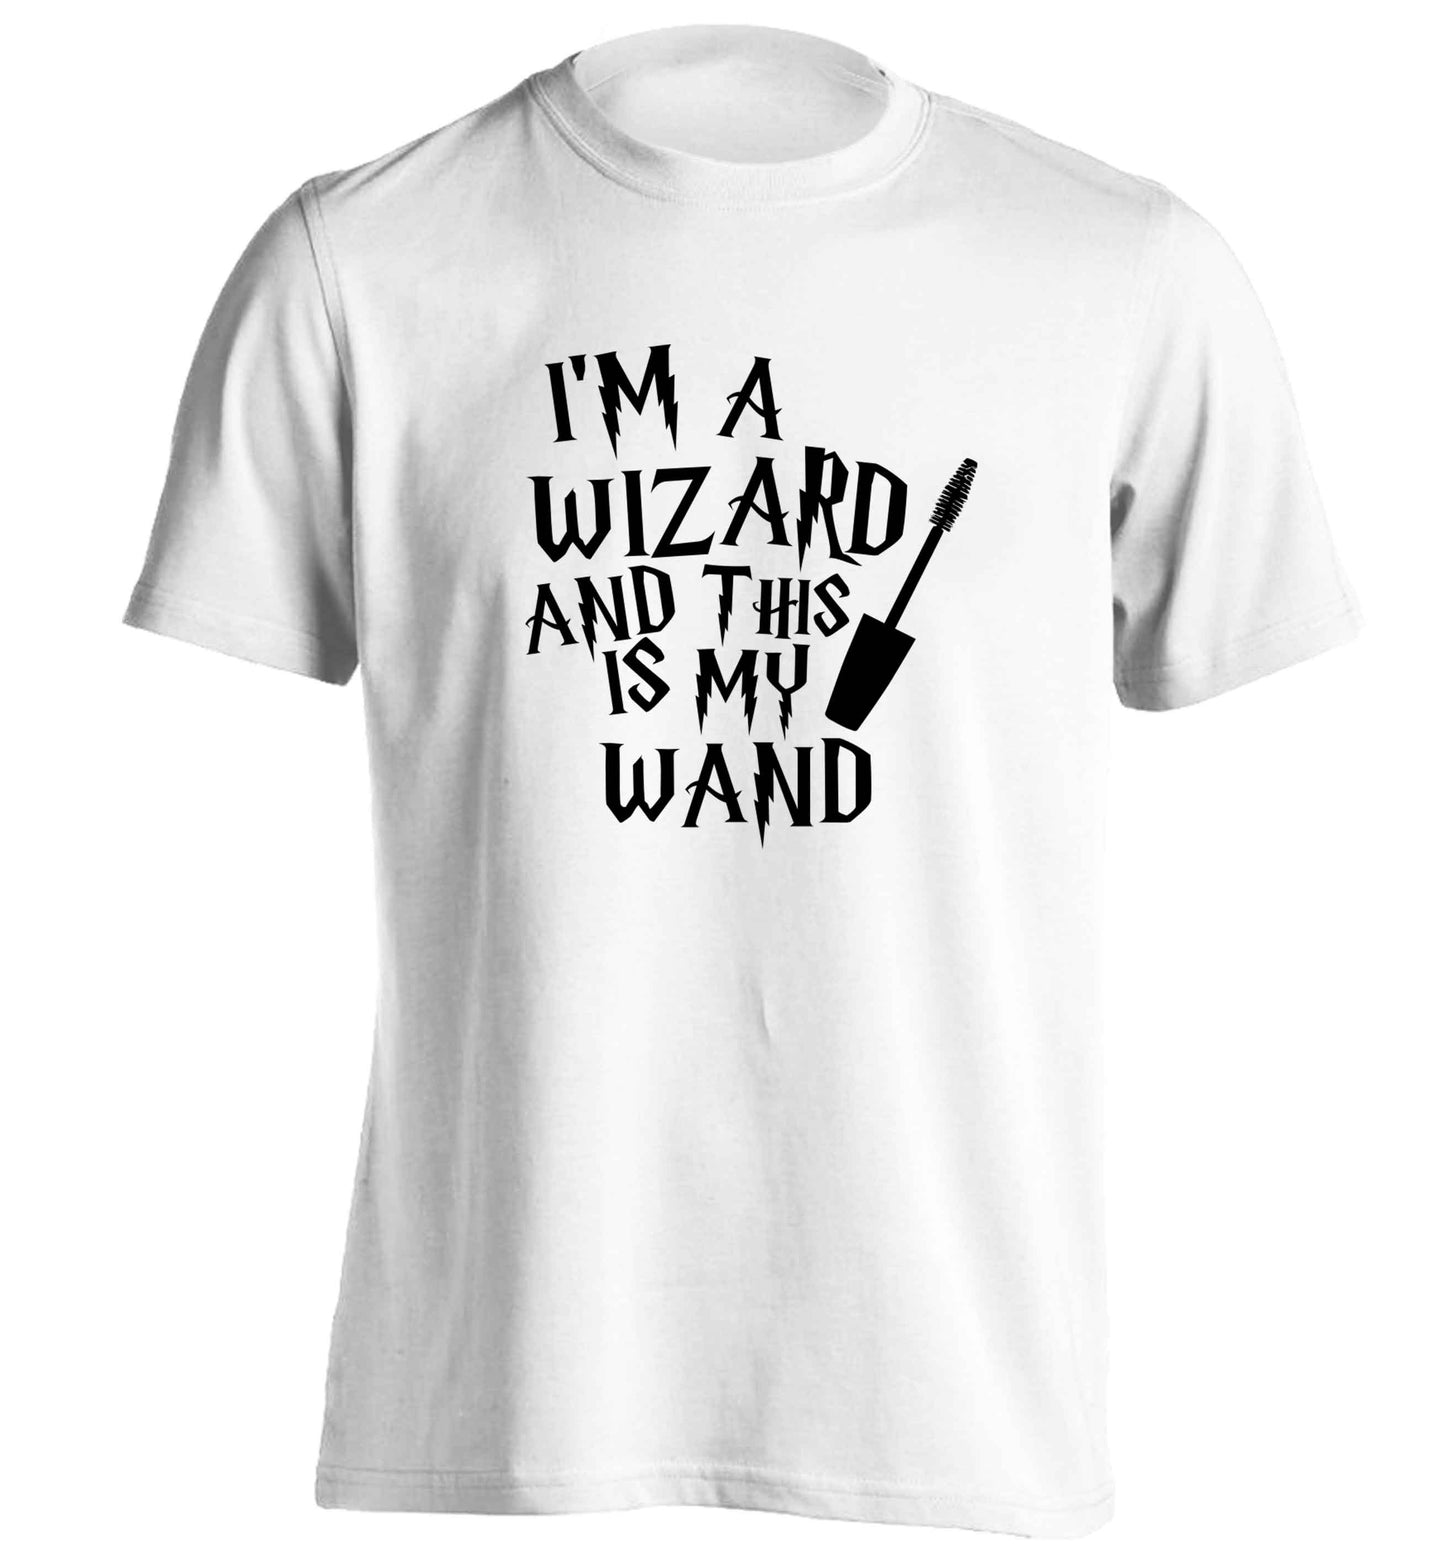 I'm a wizard and this is my wand adults unisex white Tshirt 2XL